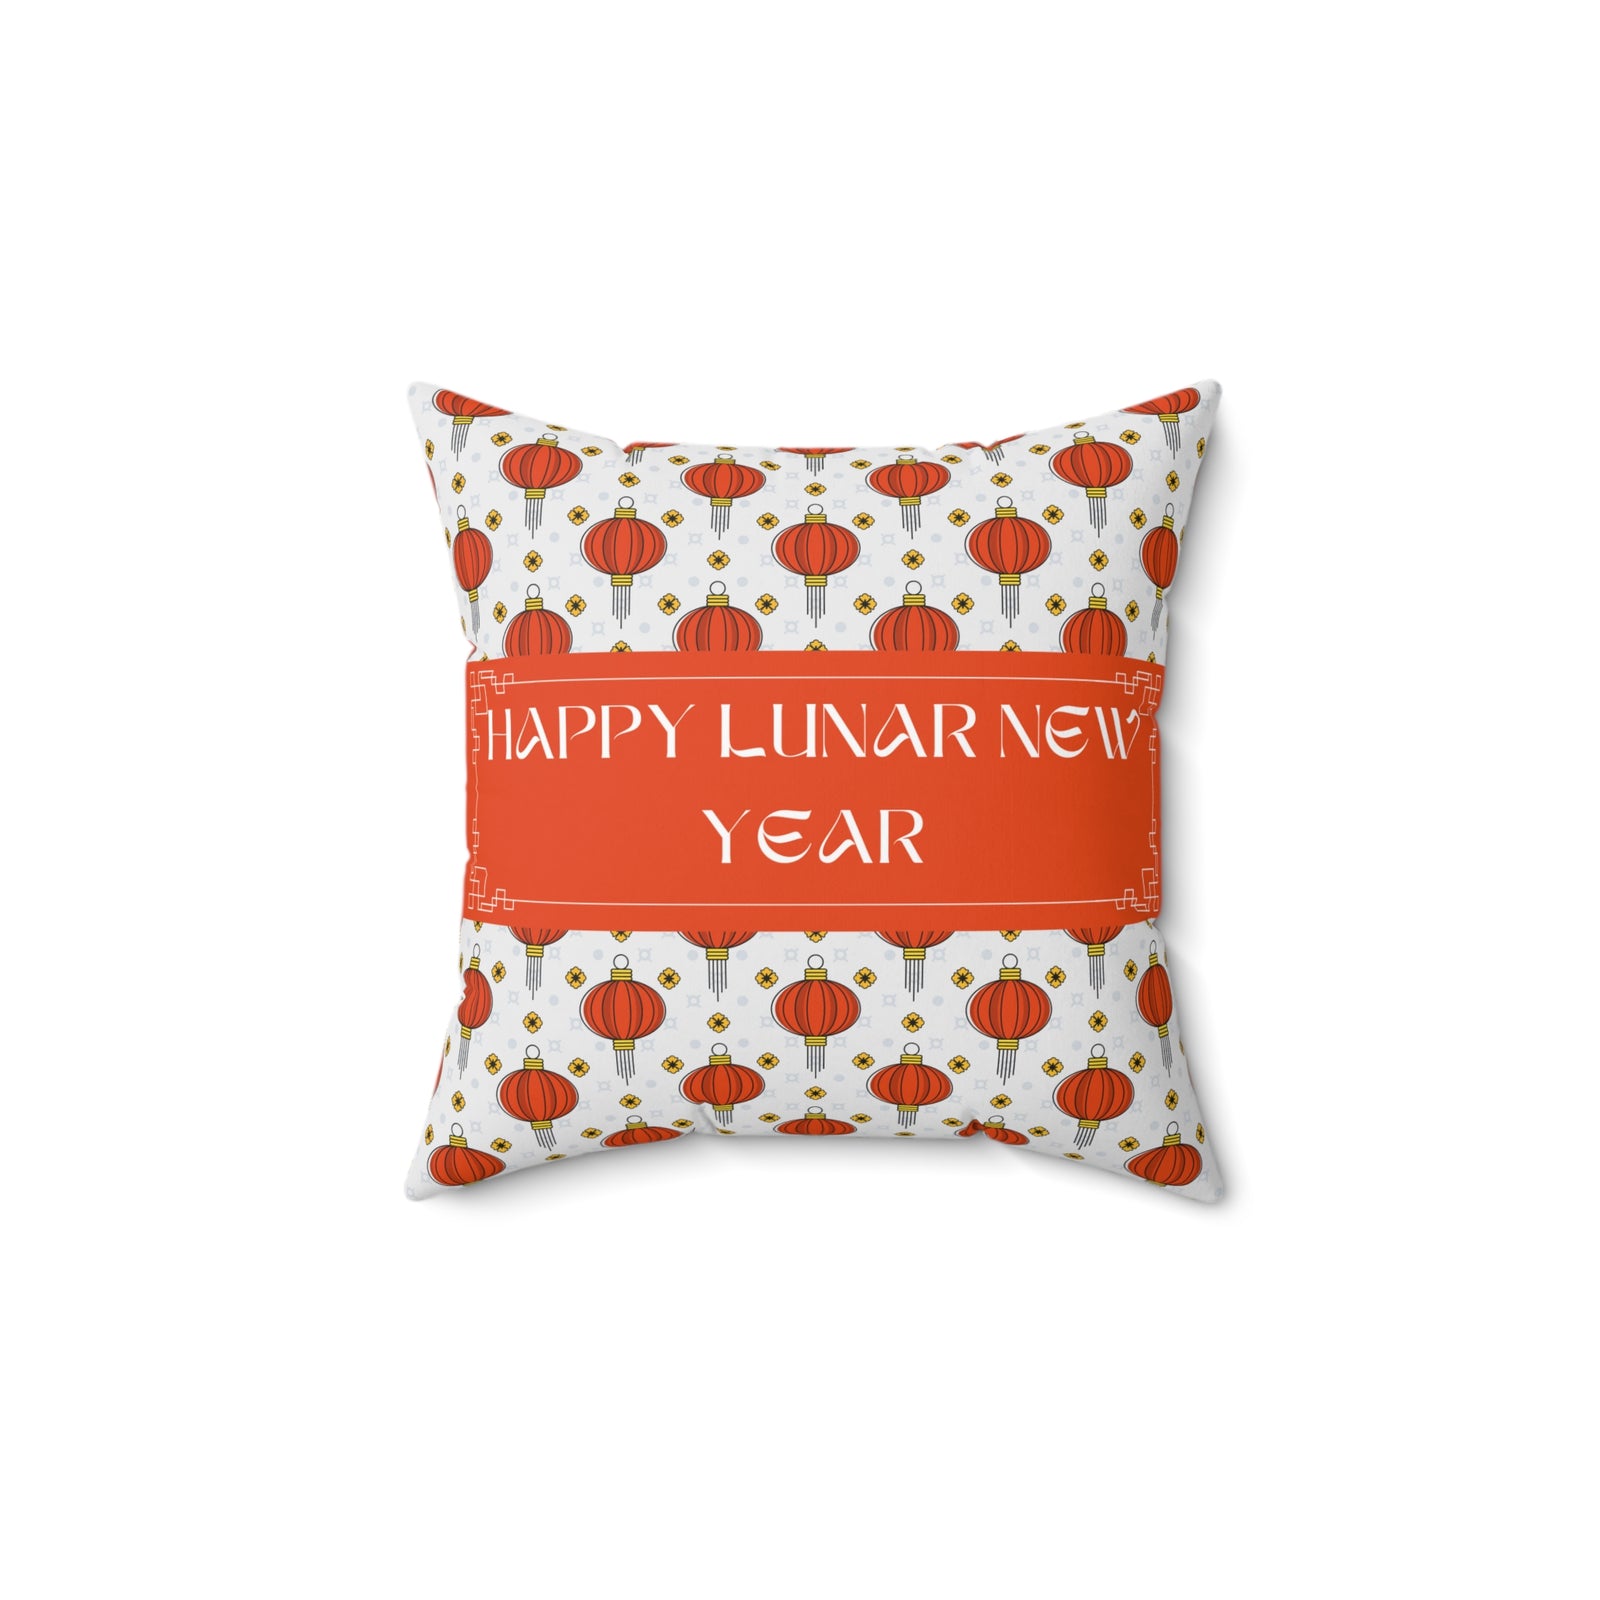 Spun Polyester TRYKID Happy lunar New Year Square Pillow